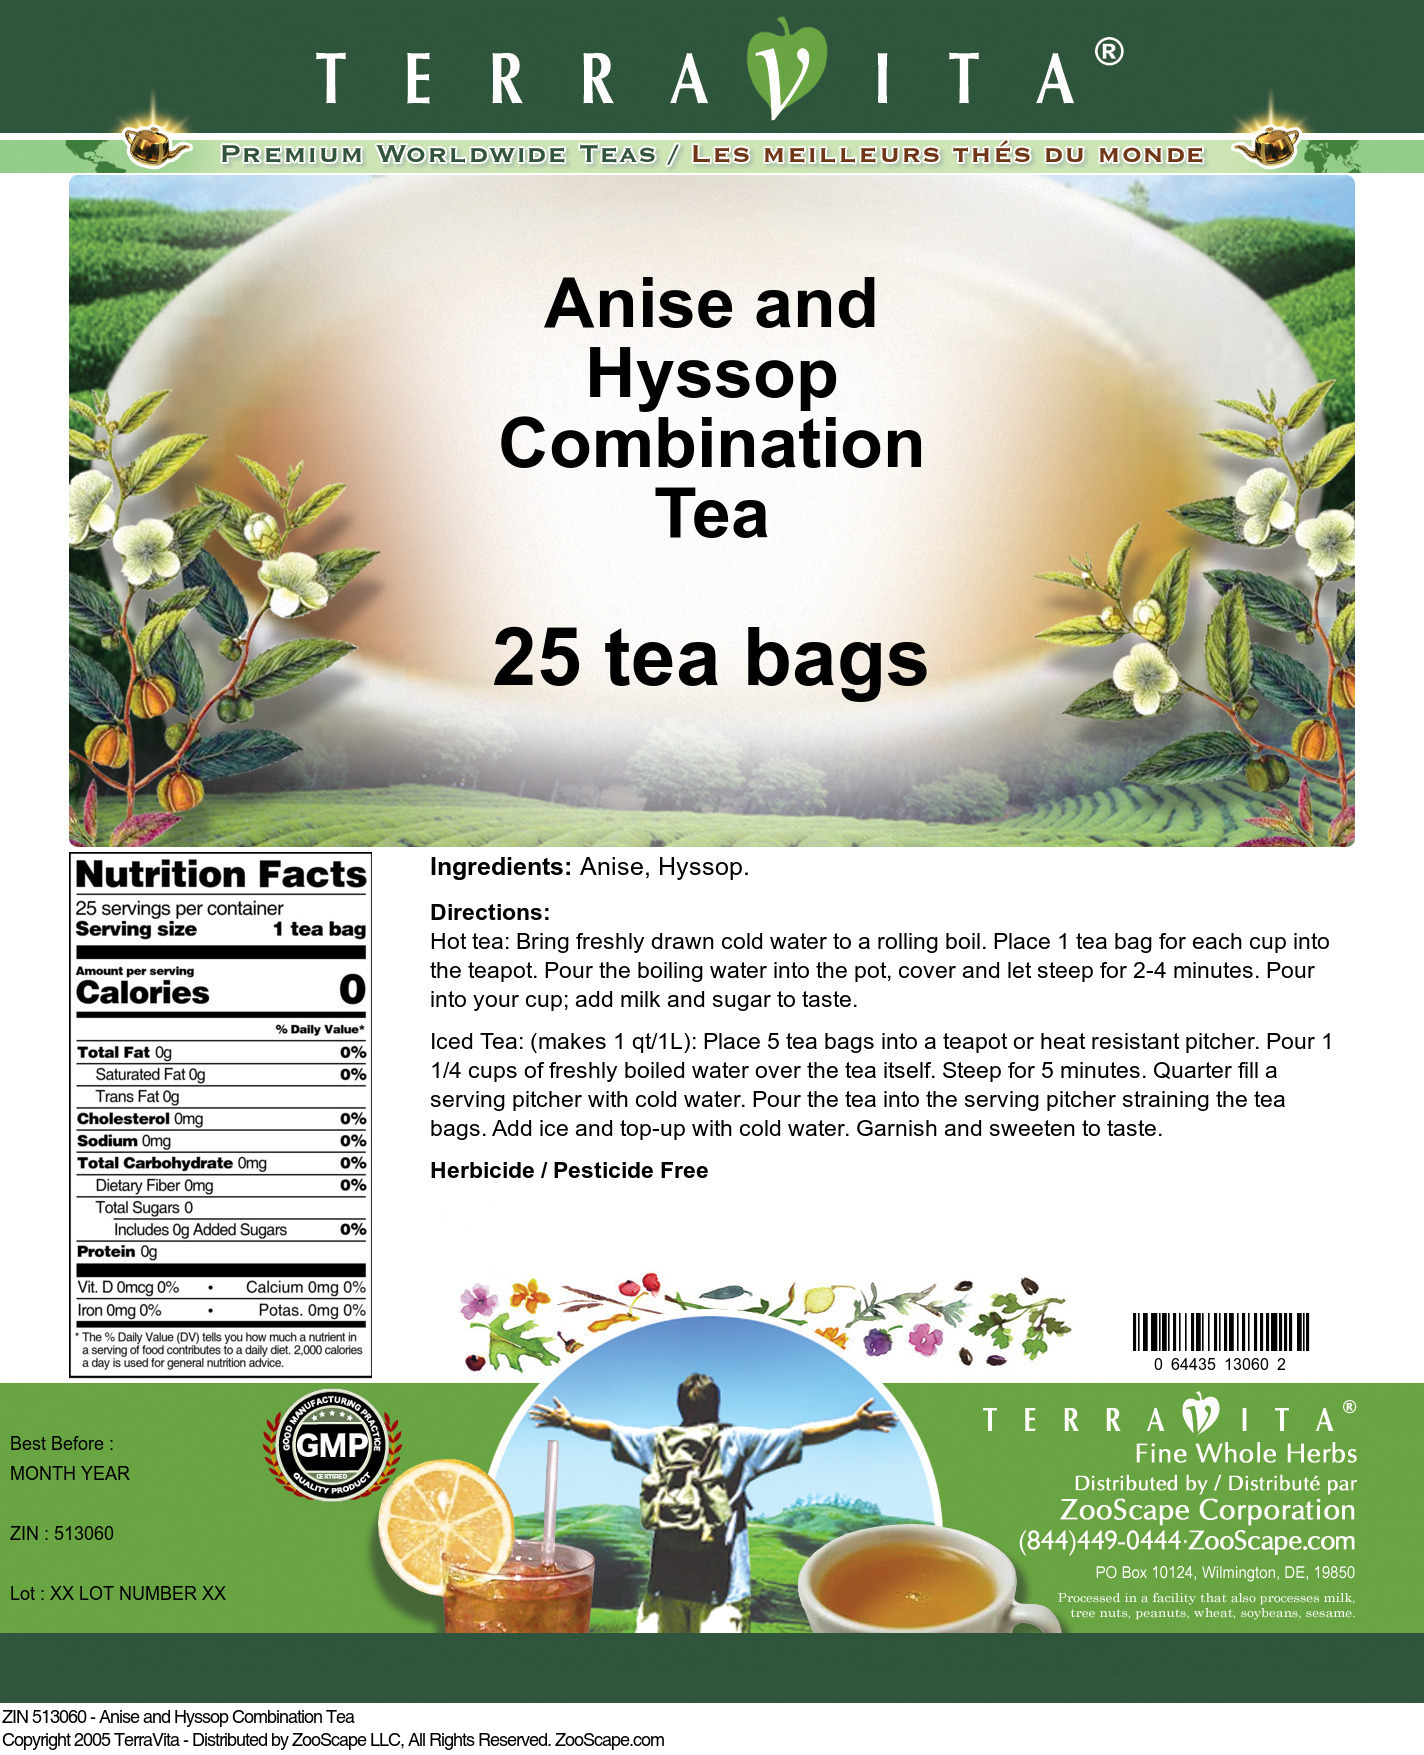 Anise and Hyssop Combination Tea - Label